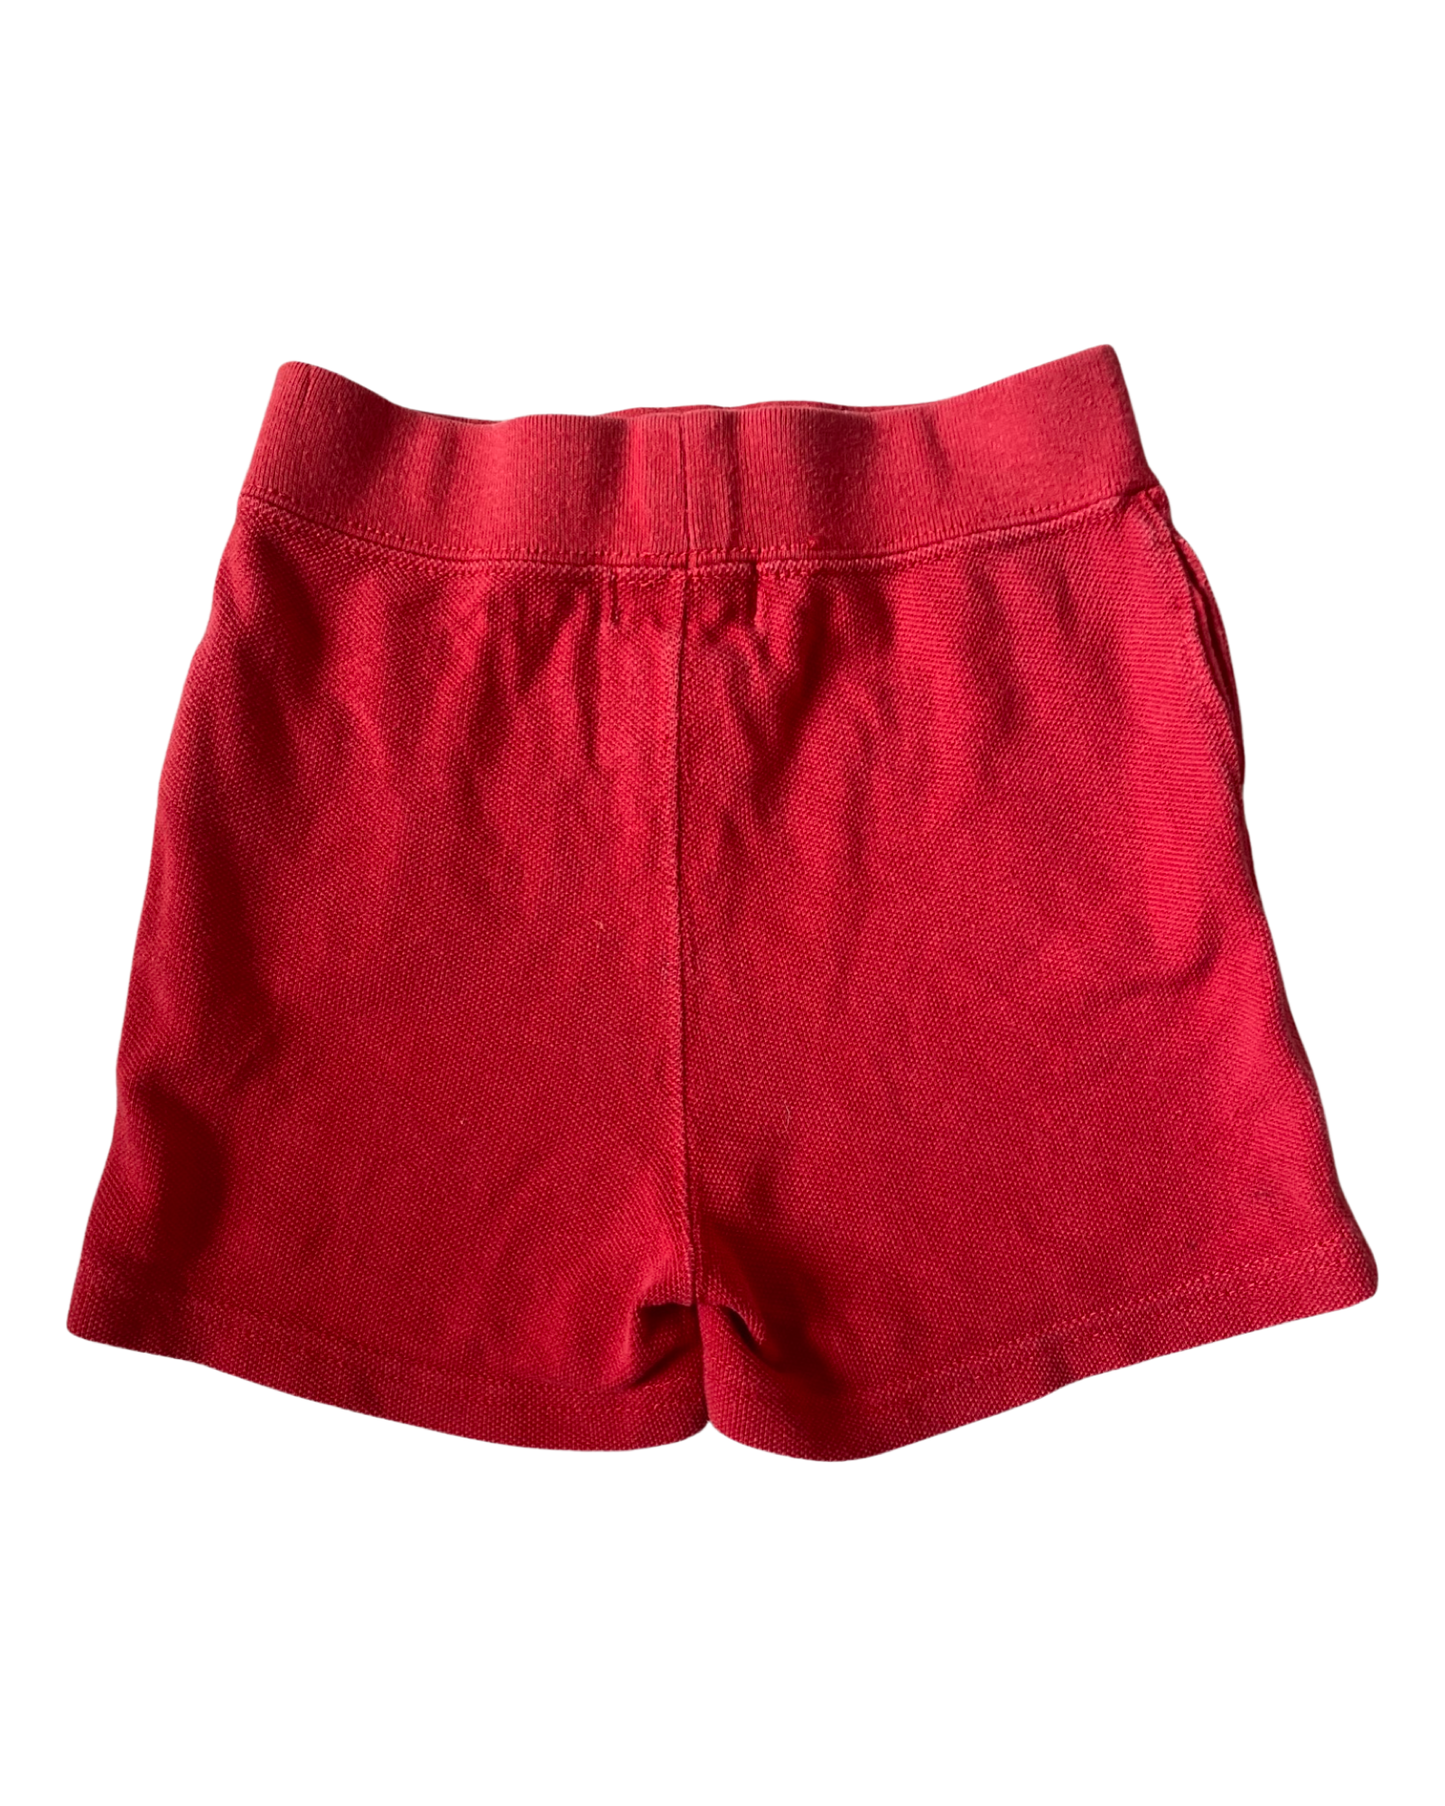 Ralph Lauren Polo red baby shorts (size 6-9mths)